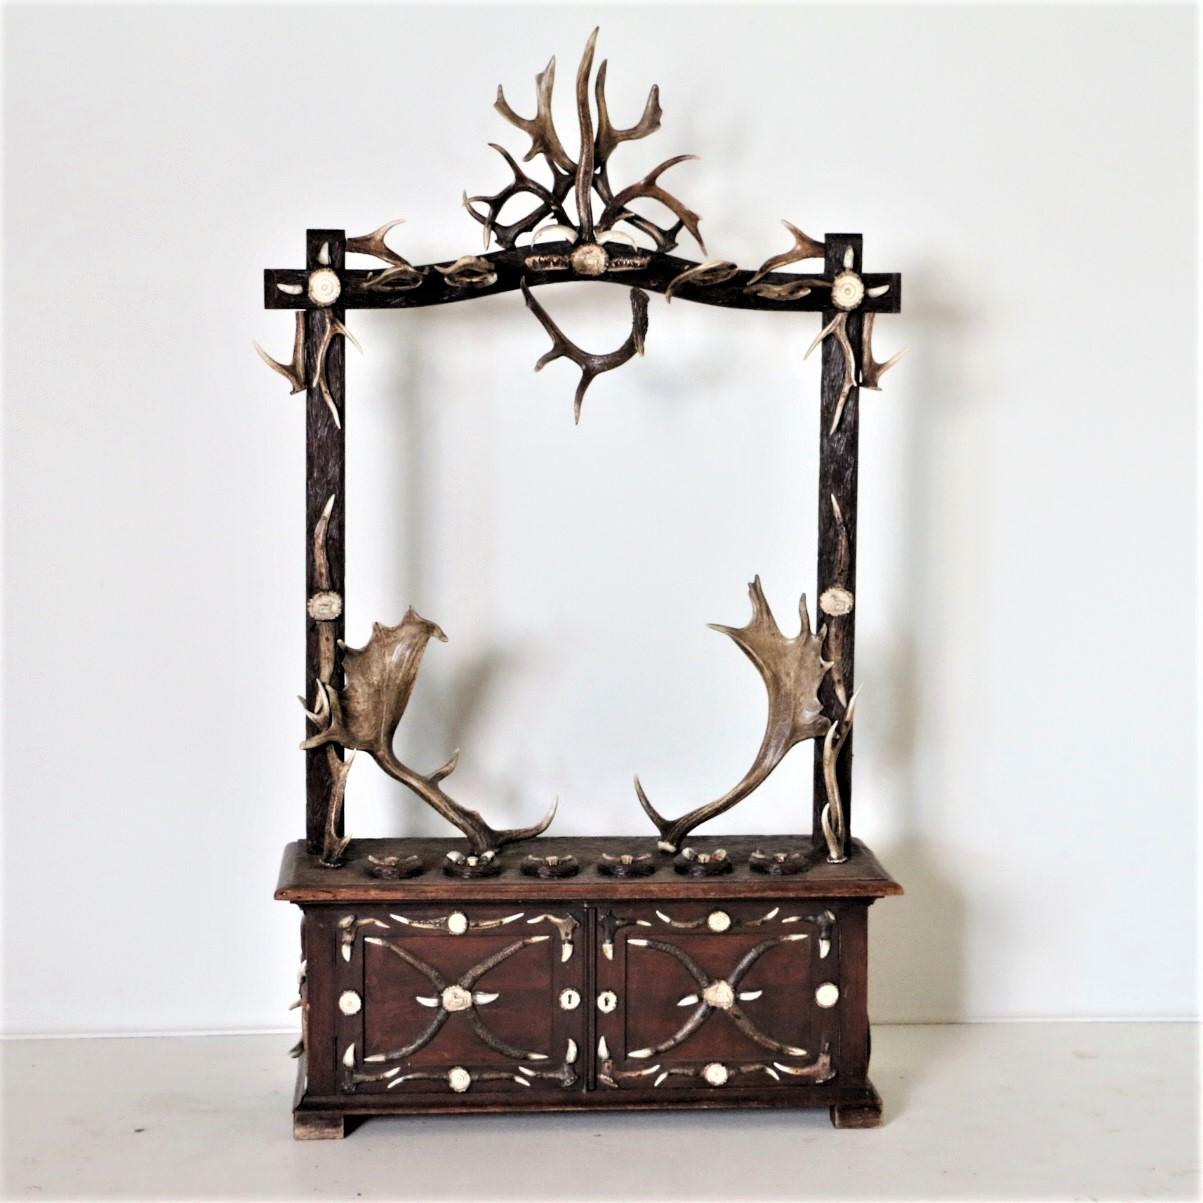 This highly unusual gun rack is from the famous Black Forest region of Germany. Spectacular details include multiple antler 